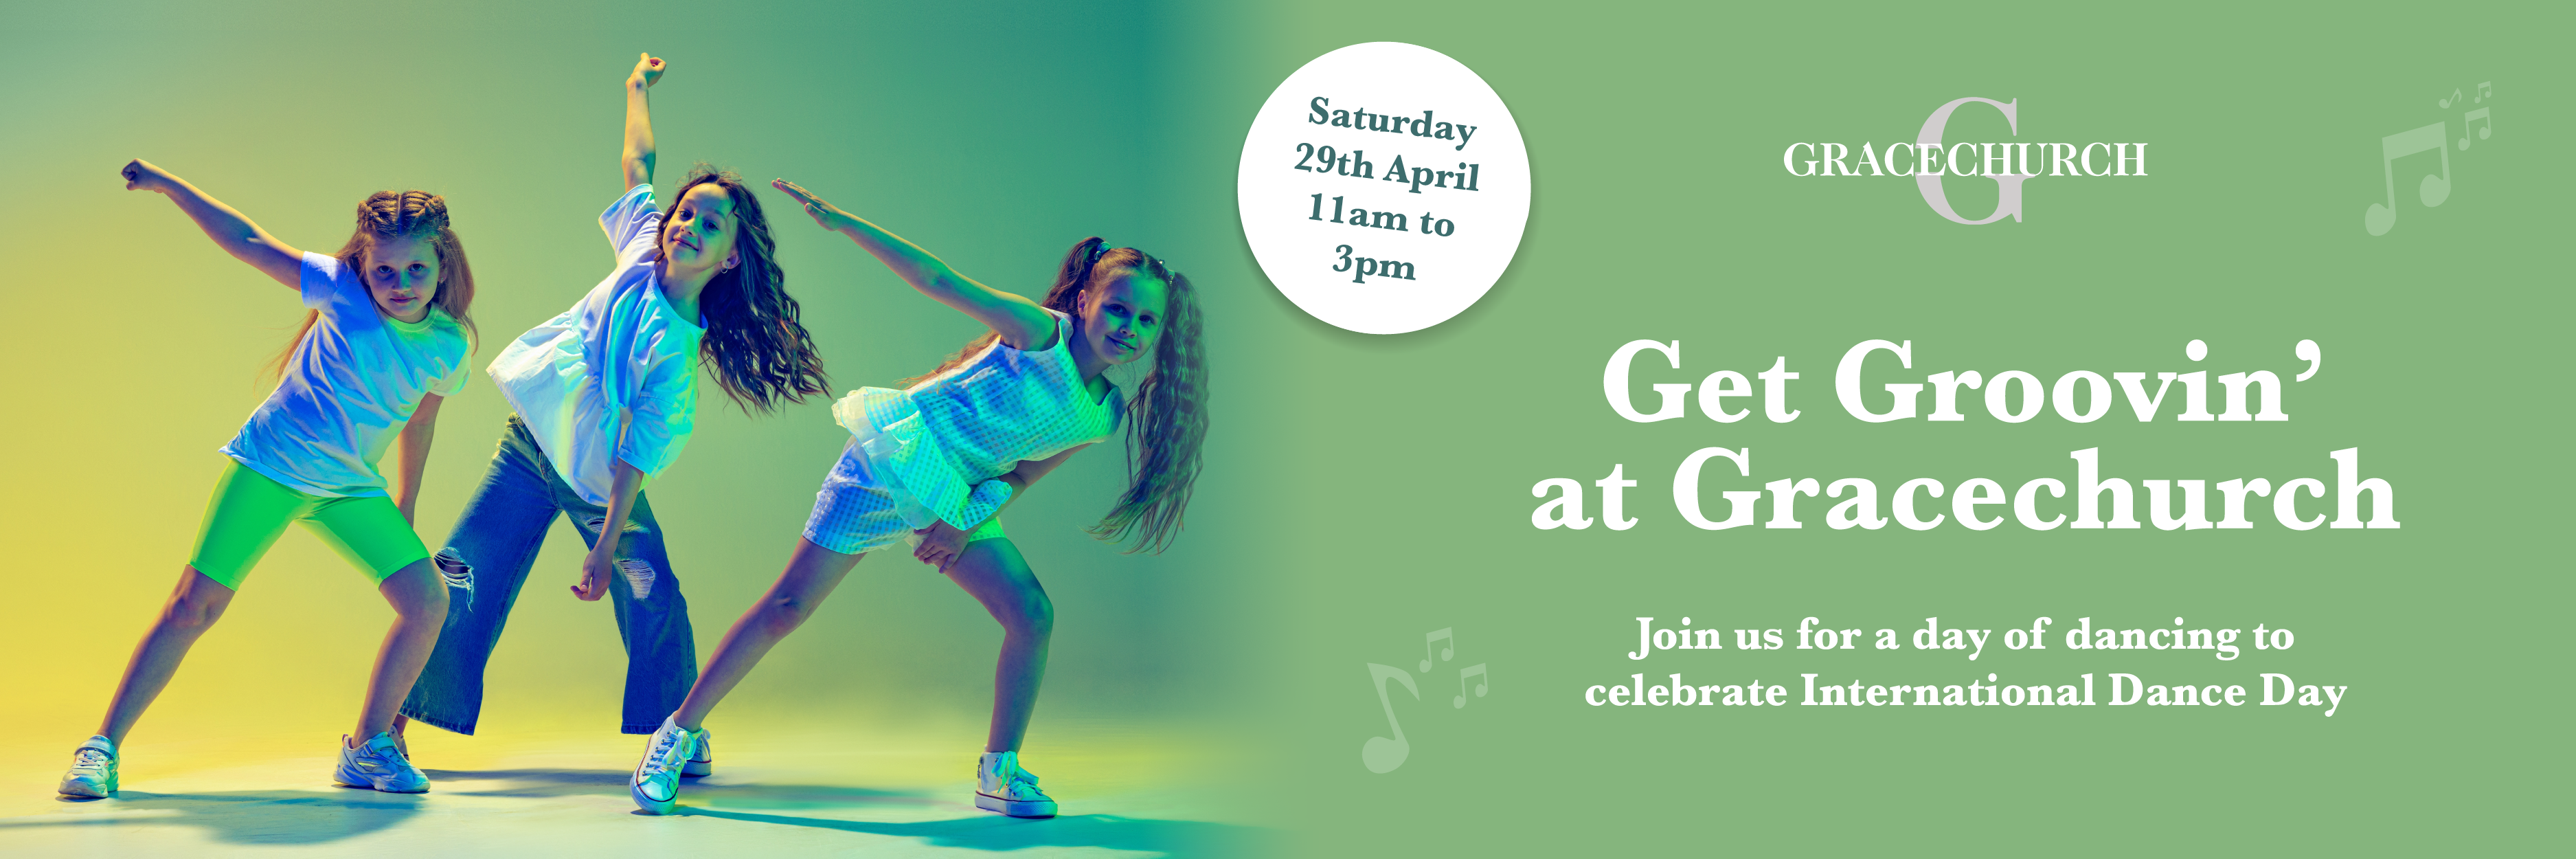 Get Groovin’ at Gracechurch